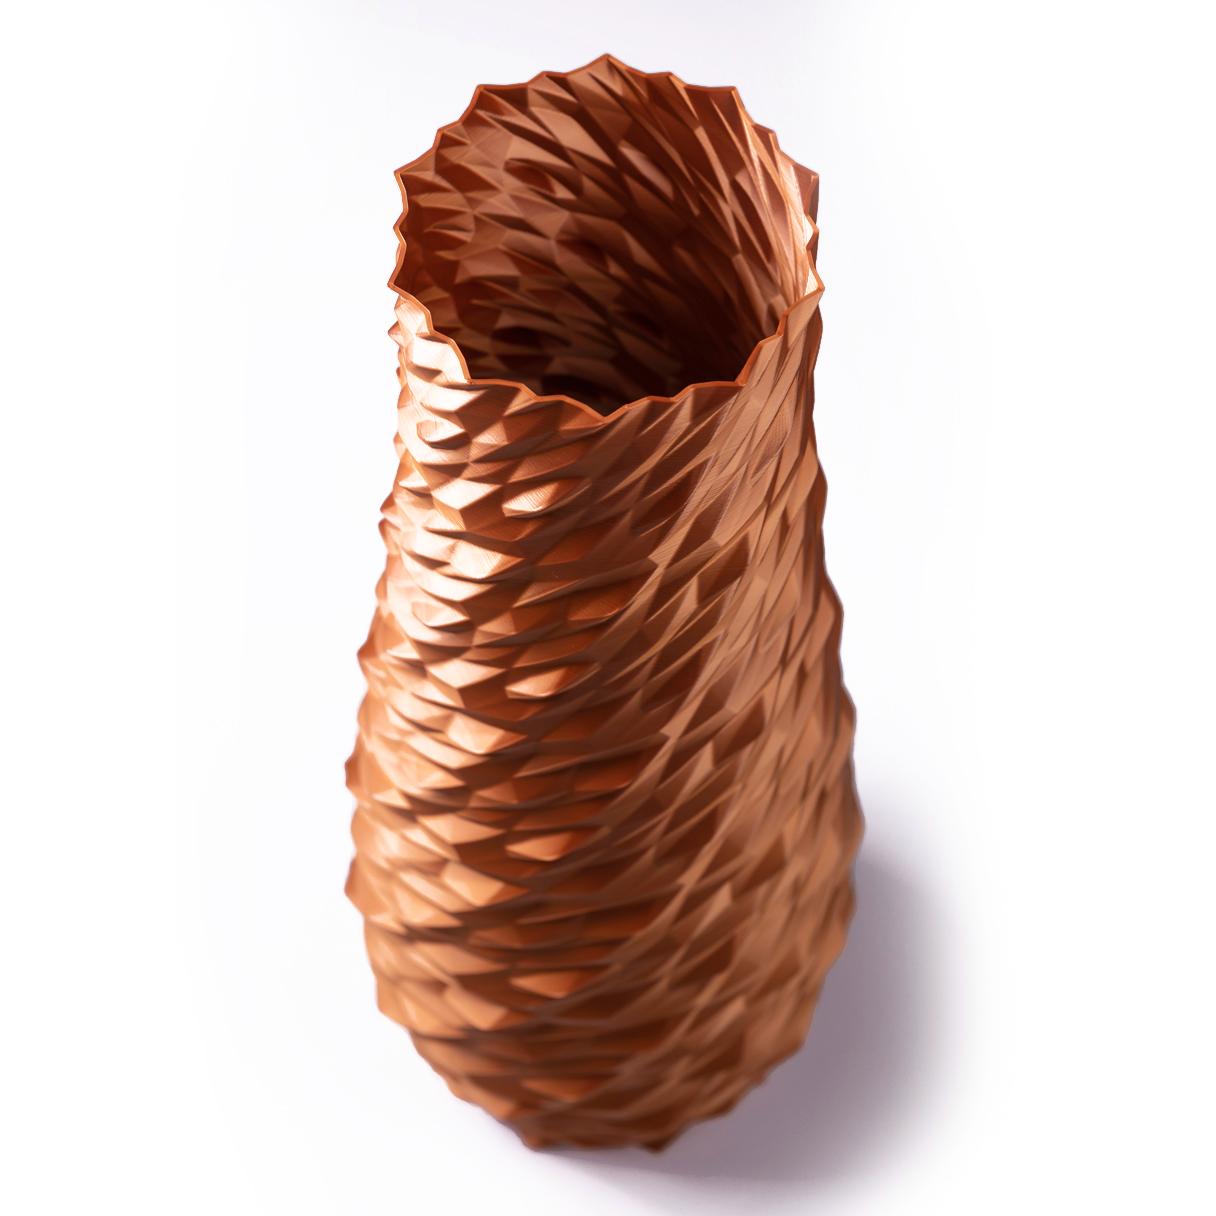 Post-Modern Dragonskin, Copper Contemporary Sustainable Vase-Sculpture For Sale